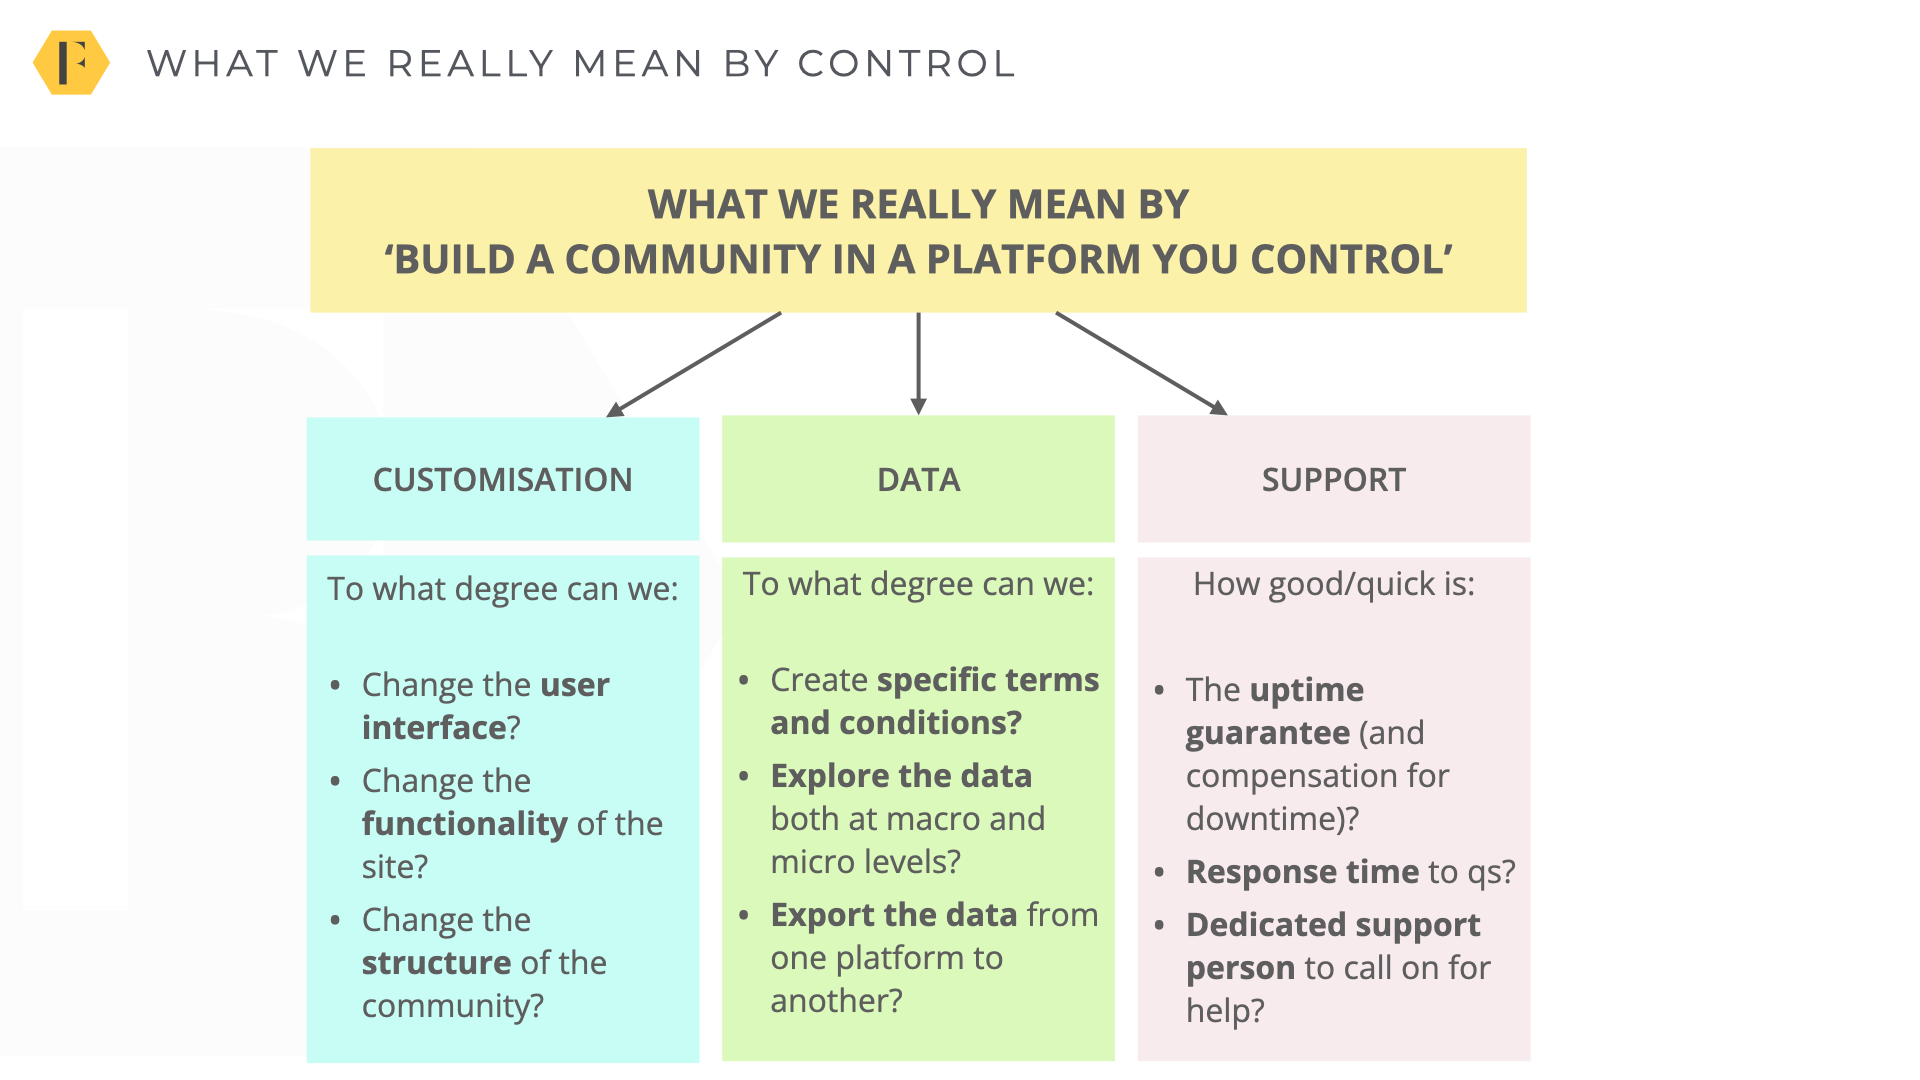 What we really mean by a platform we control